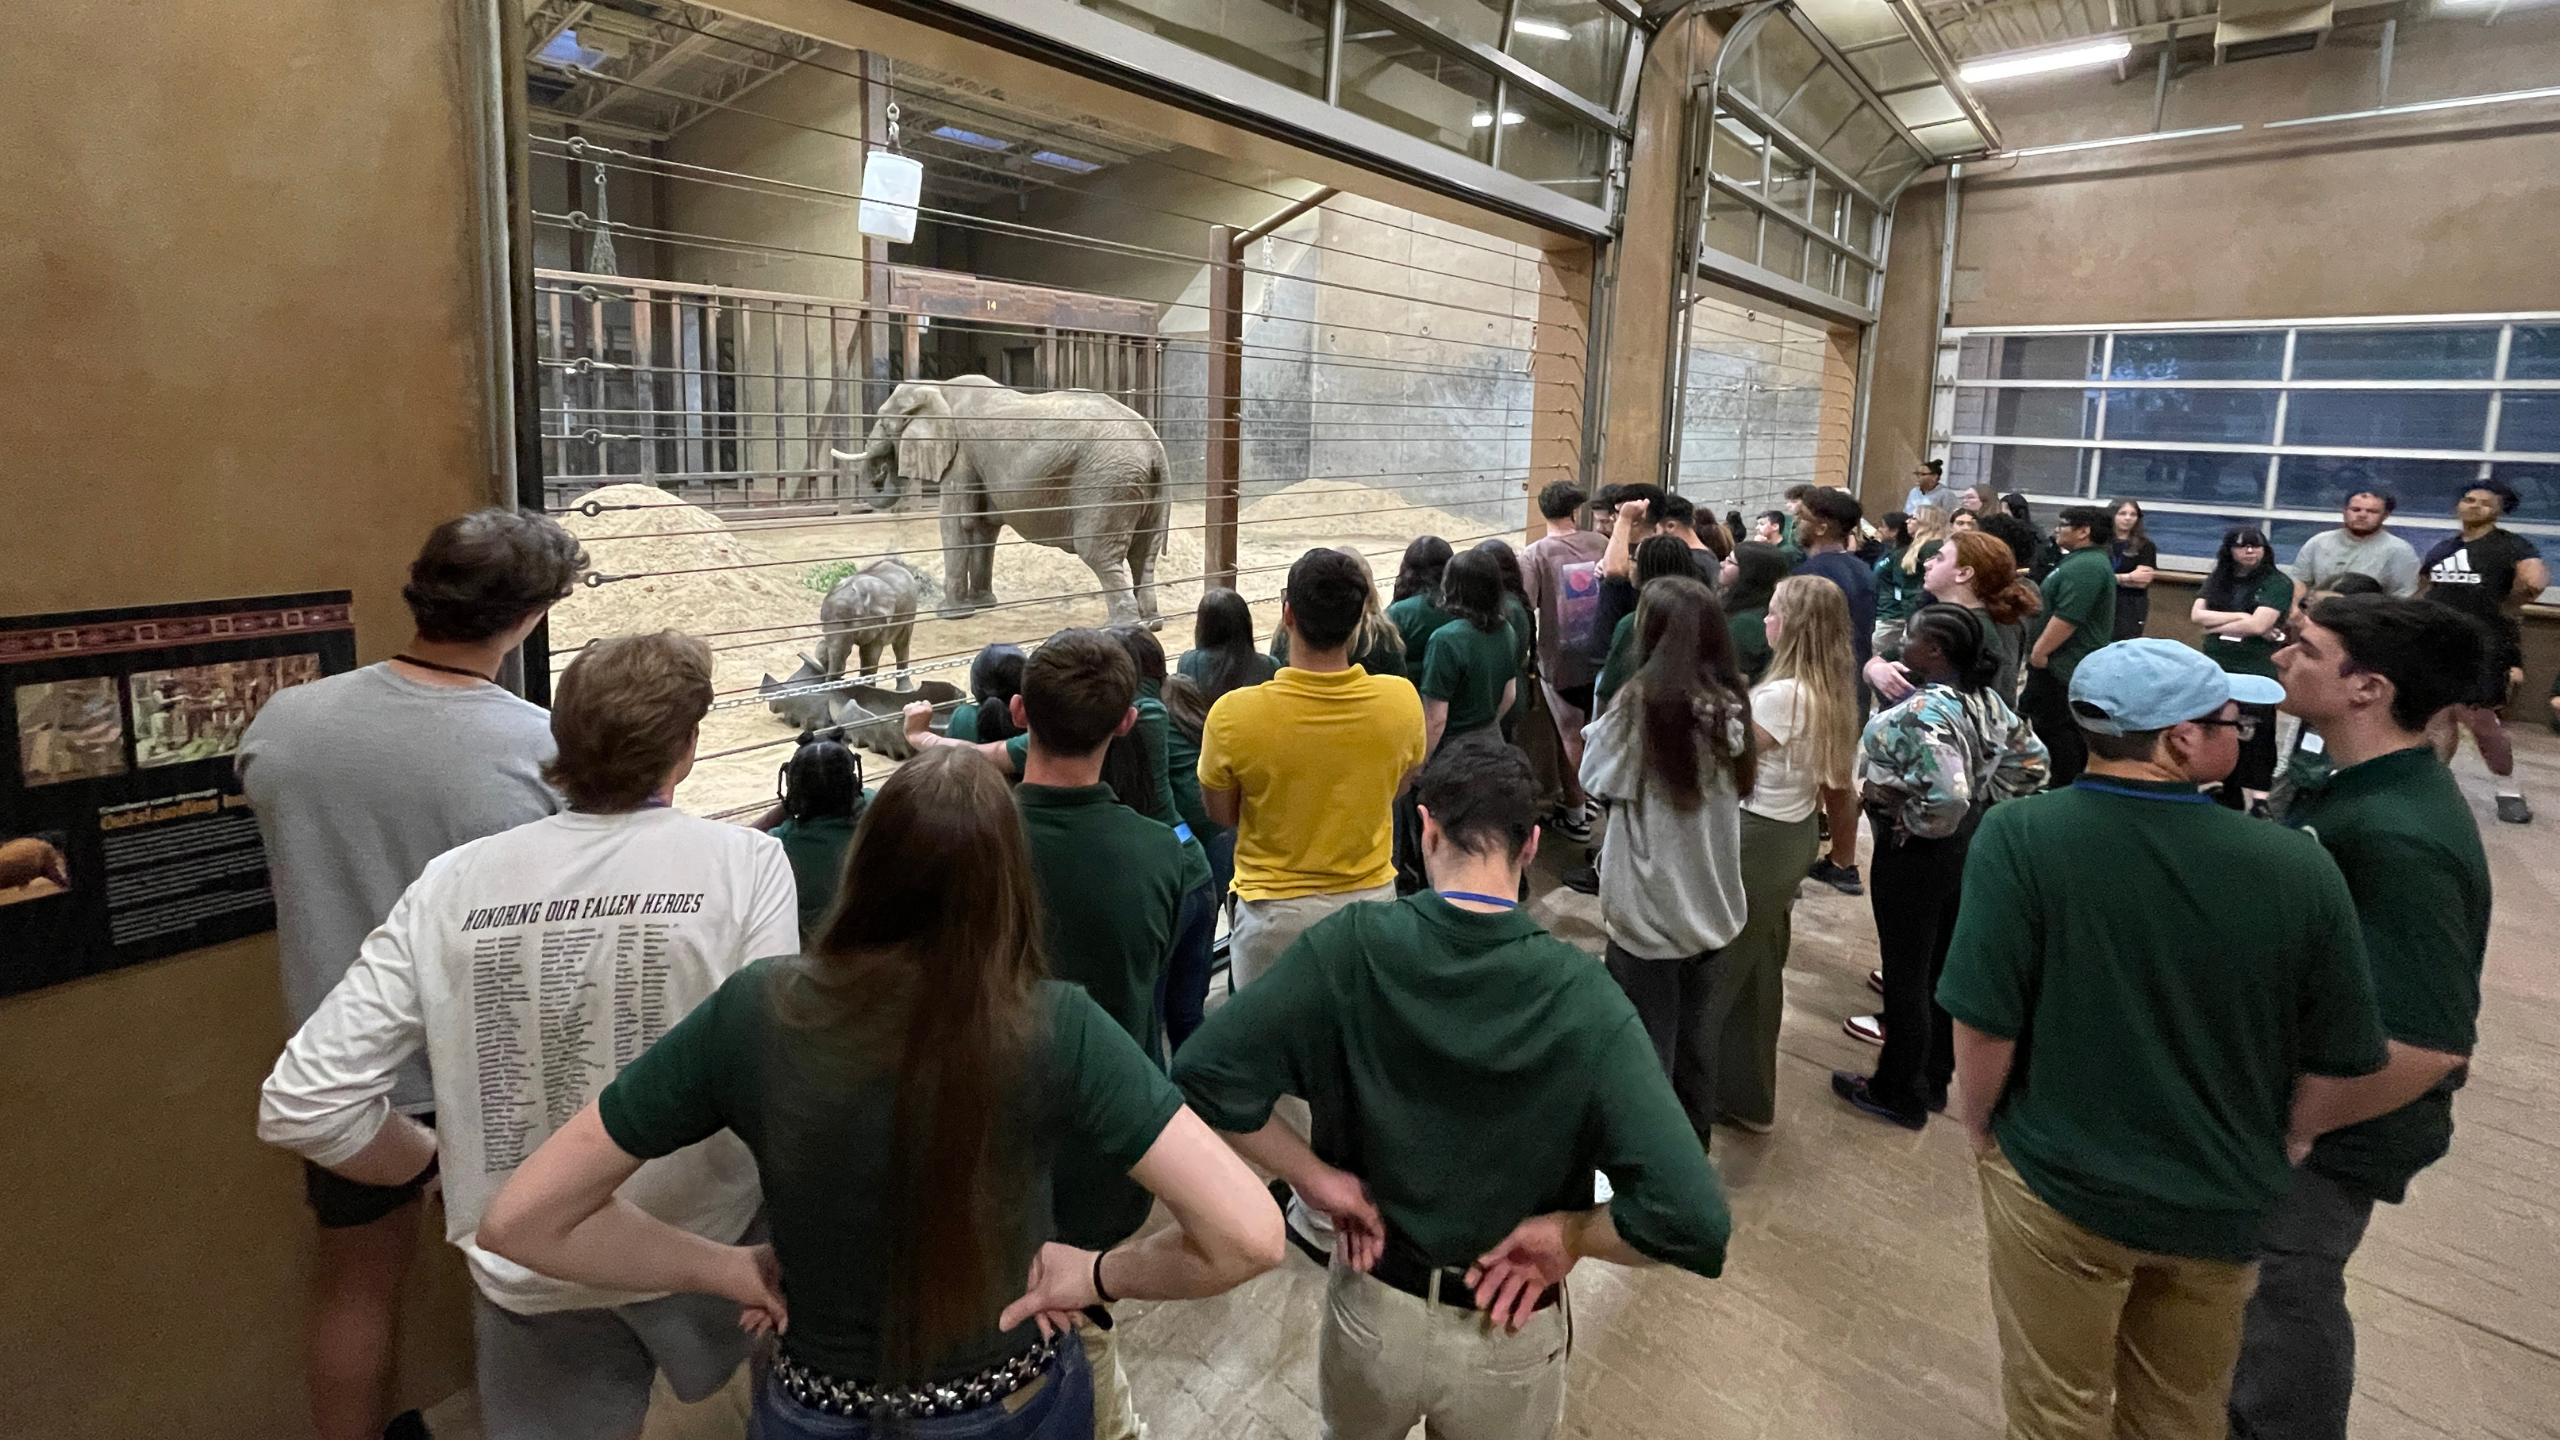 Participants at the Midwest Student Research Symposium get a behind-the-scenes look at elephants at the Toledo Zoo and Aquarium